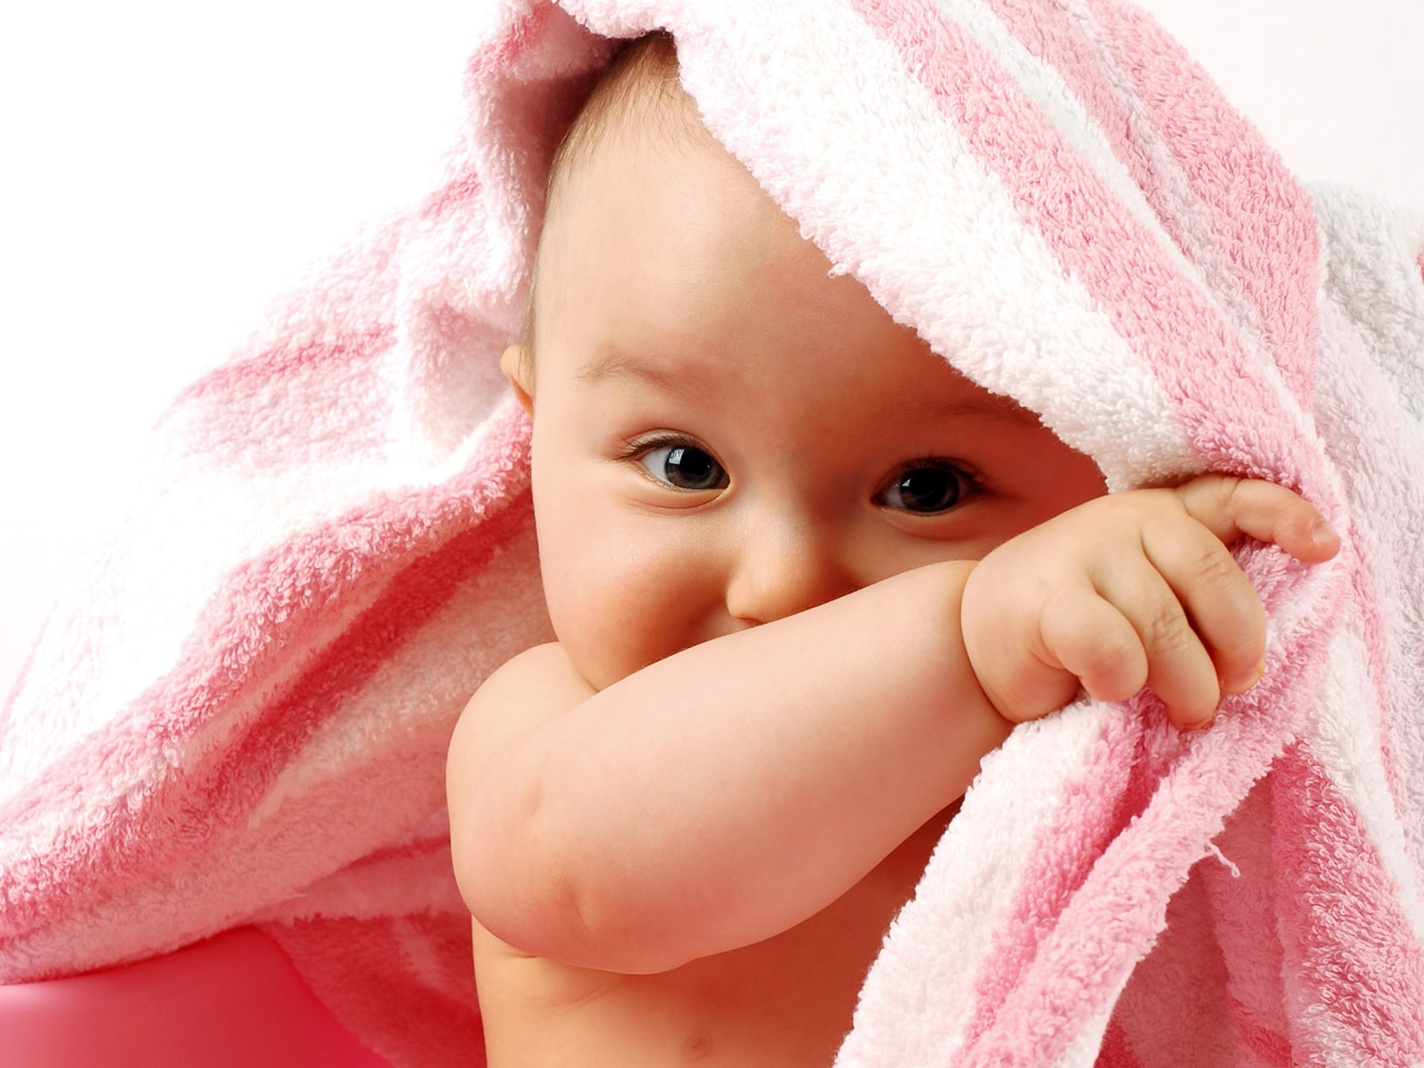 3840x2560 cute baby girl 4k download pictures for pc - Coolwallpapers.me!